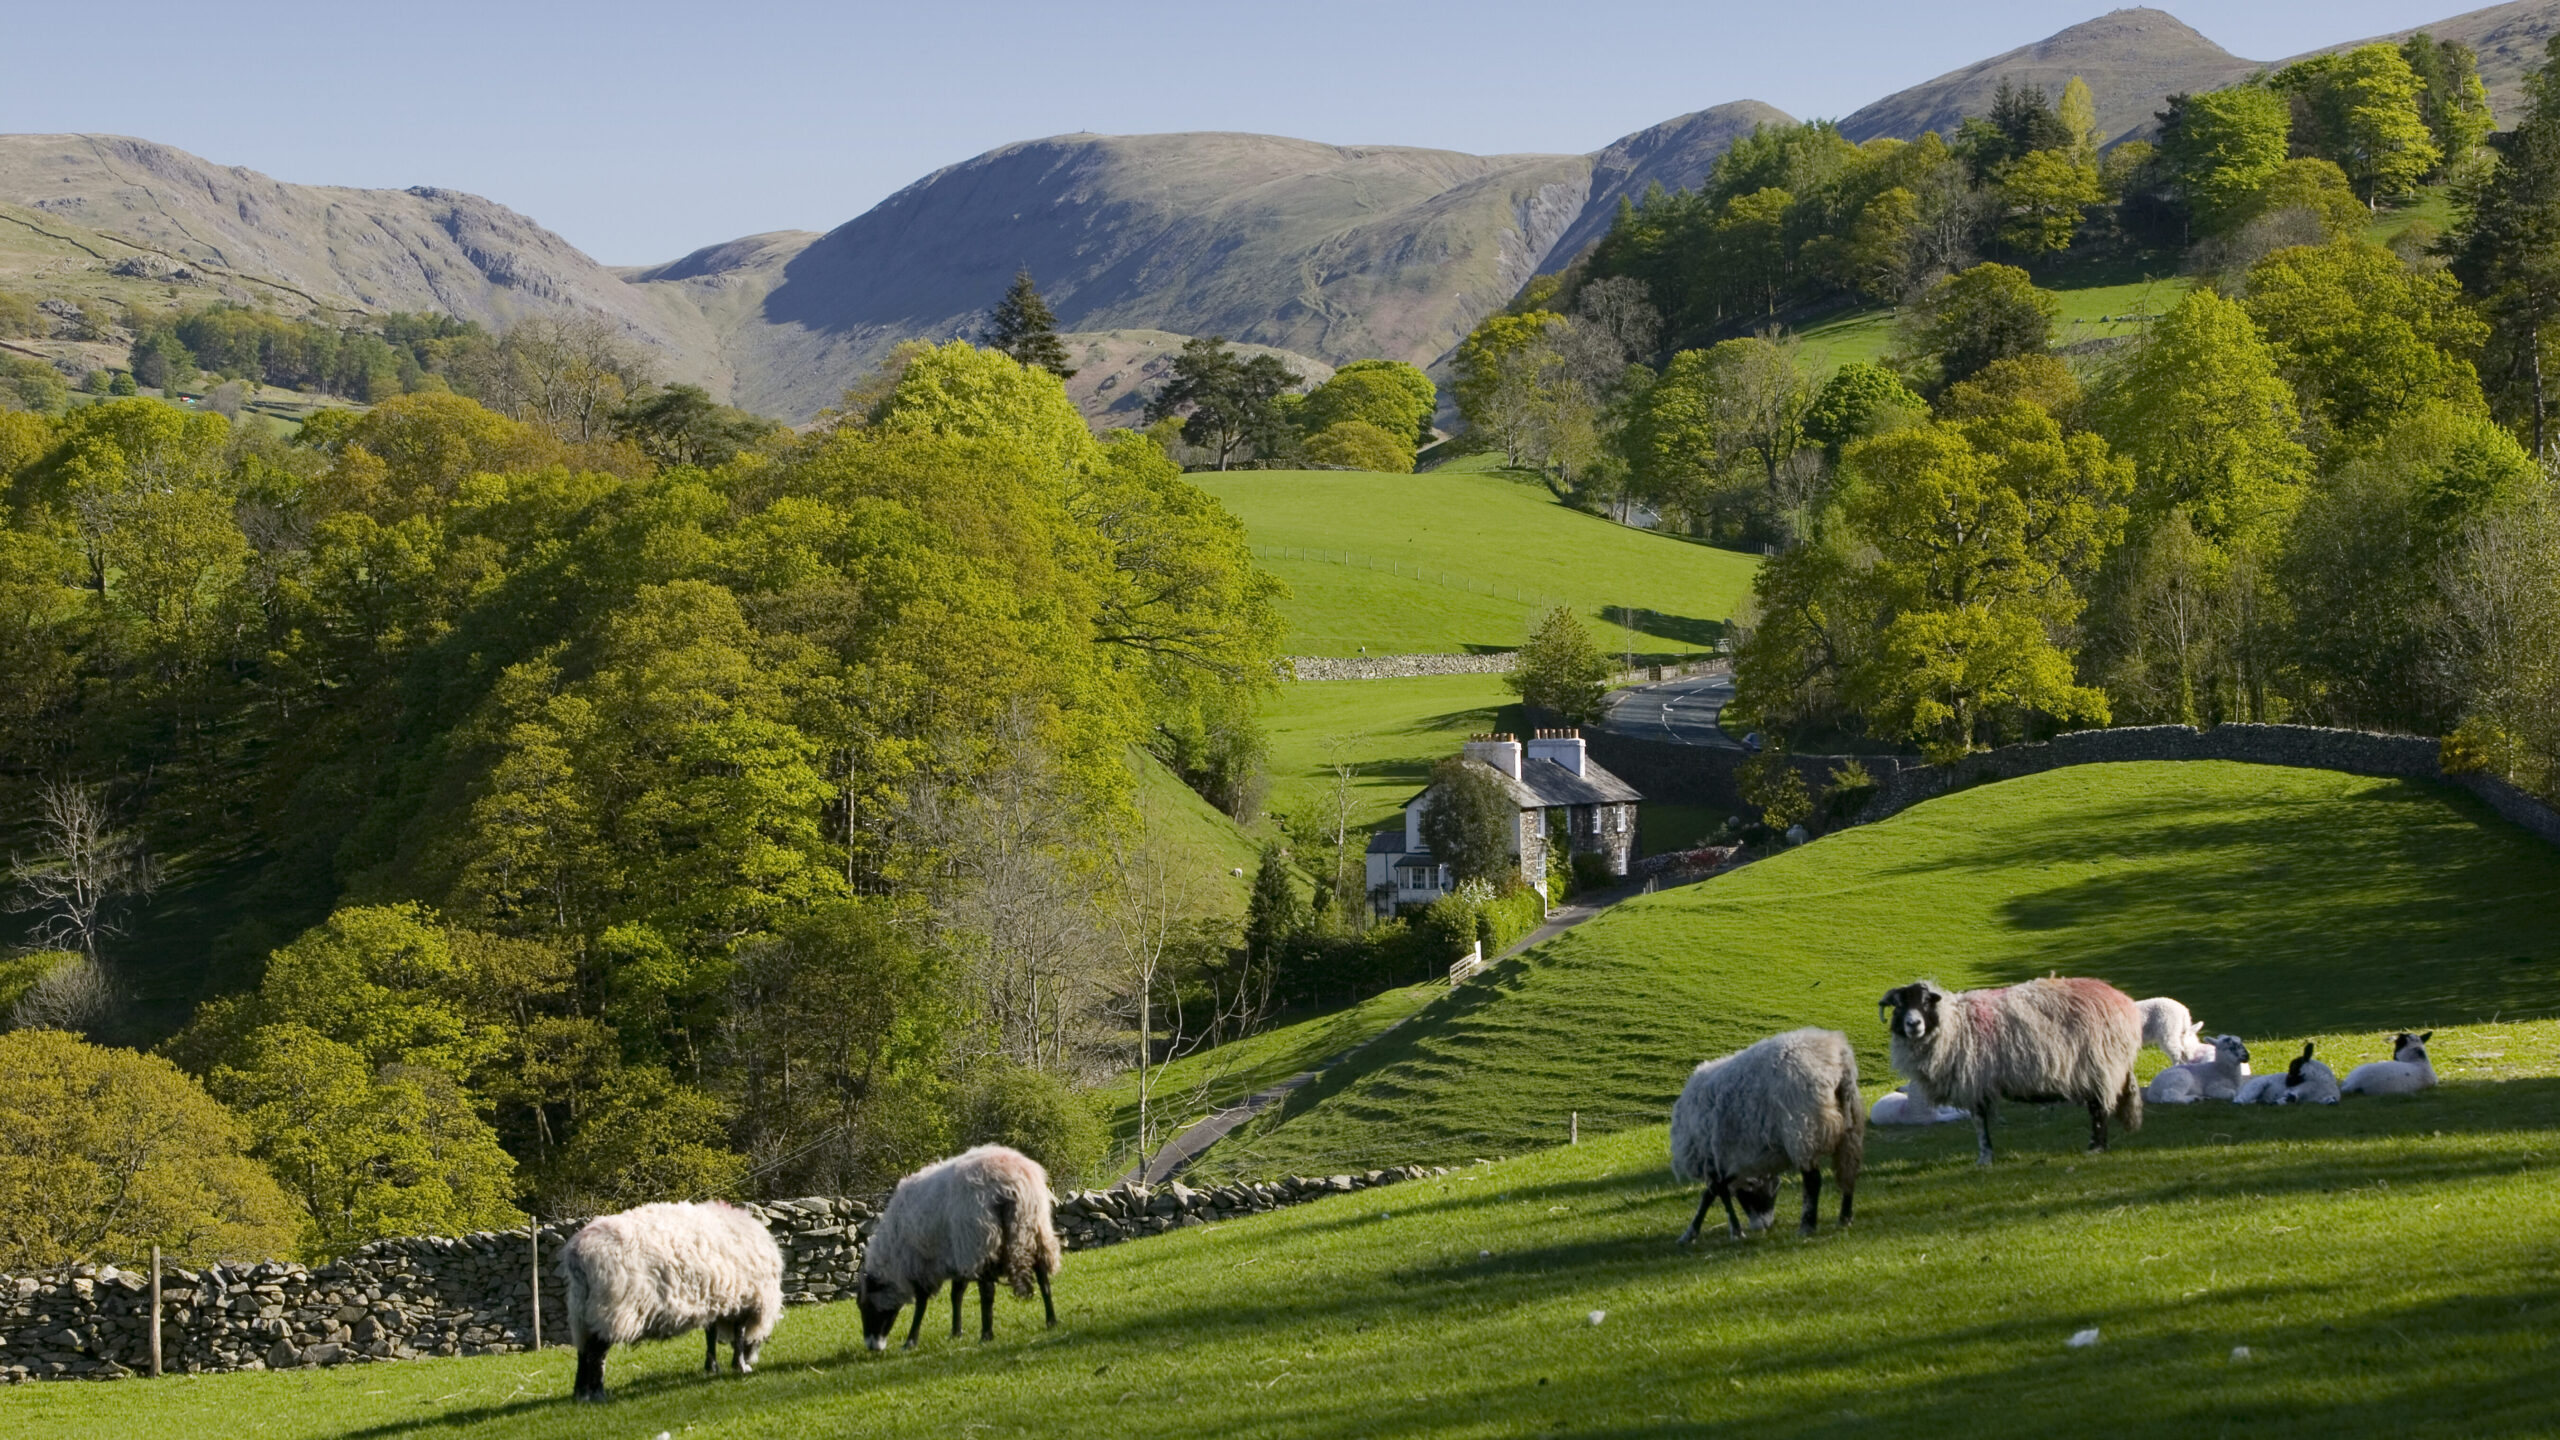 Hilly landscape with lush green trees and grass. There are sheep in the foreground.